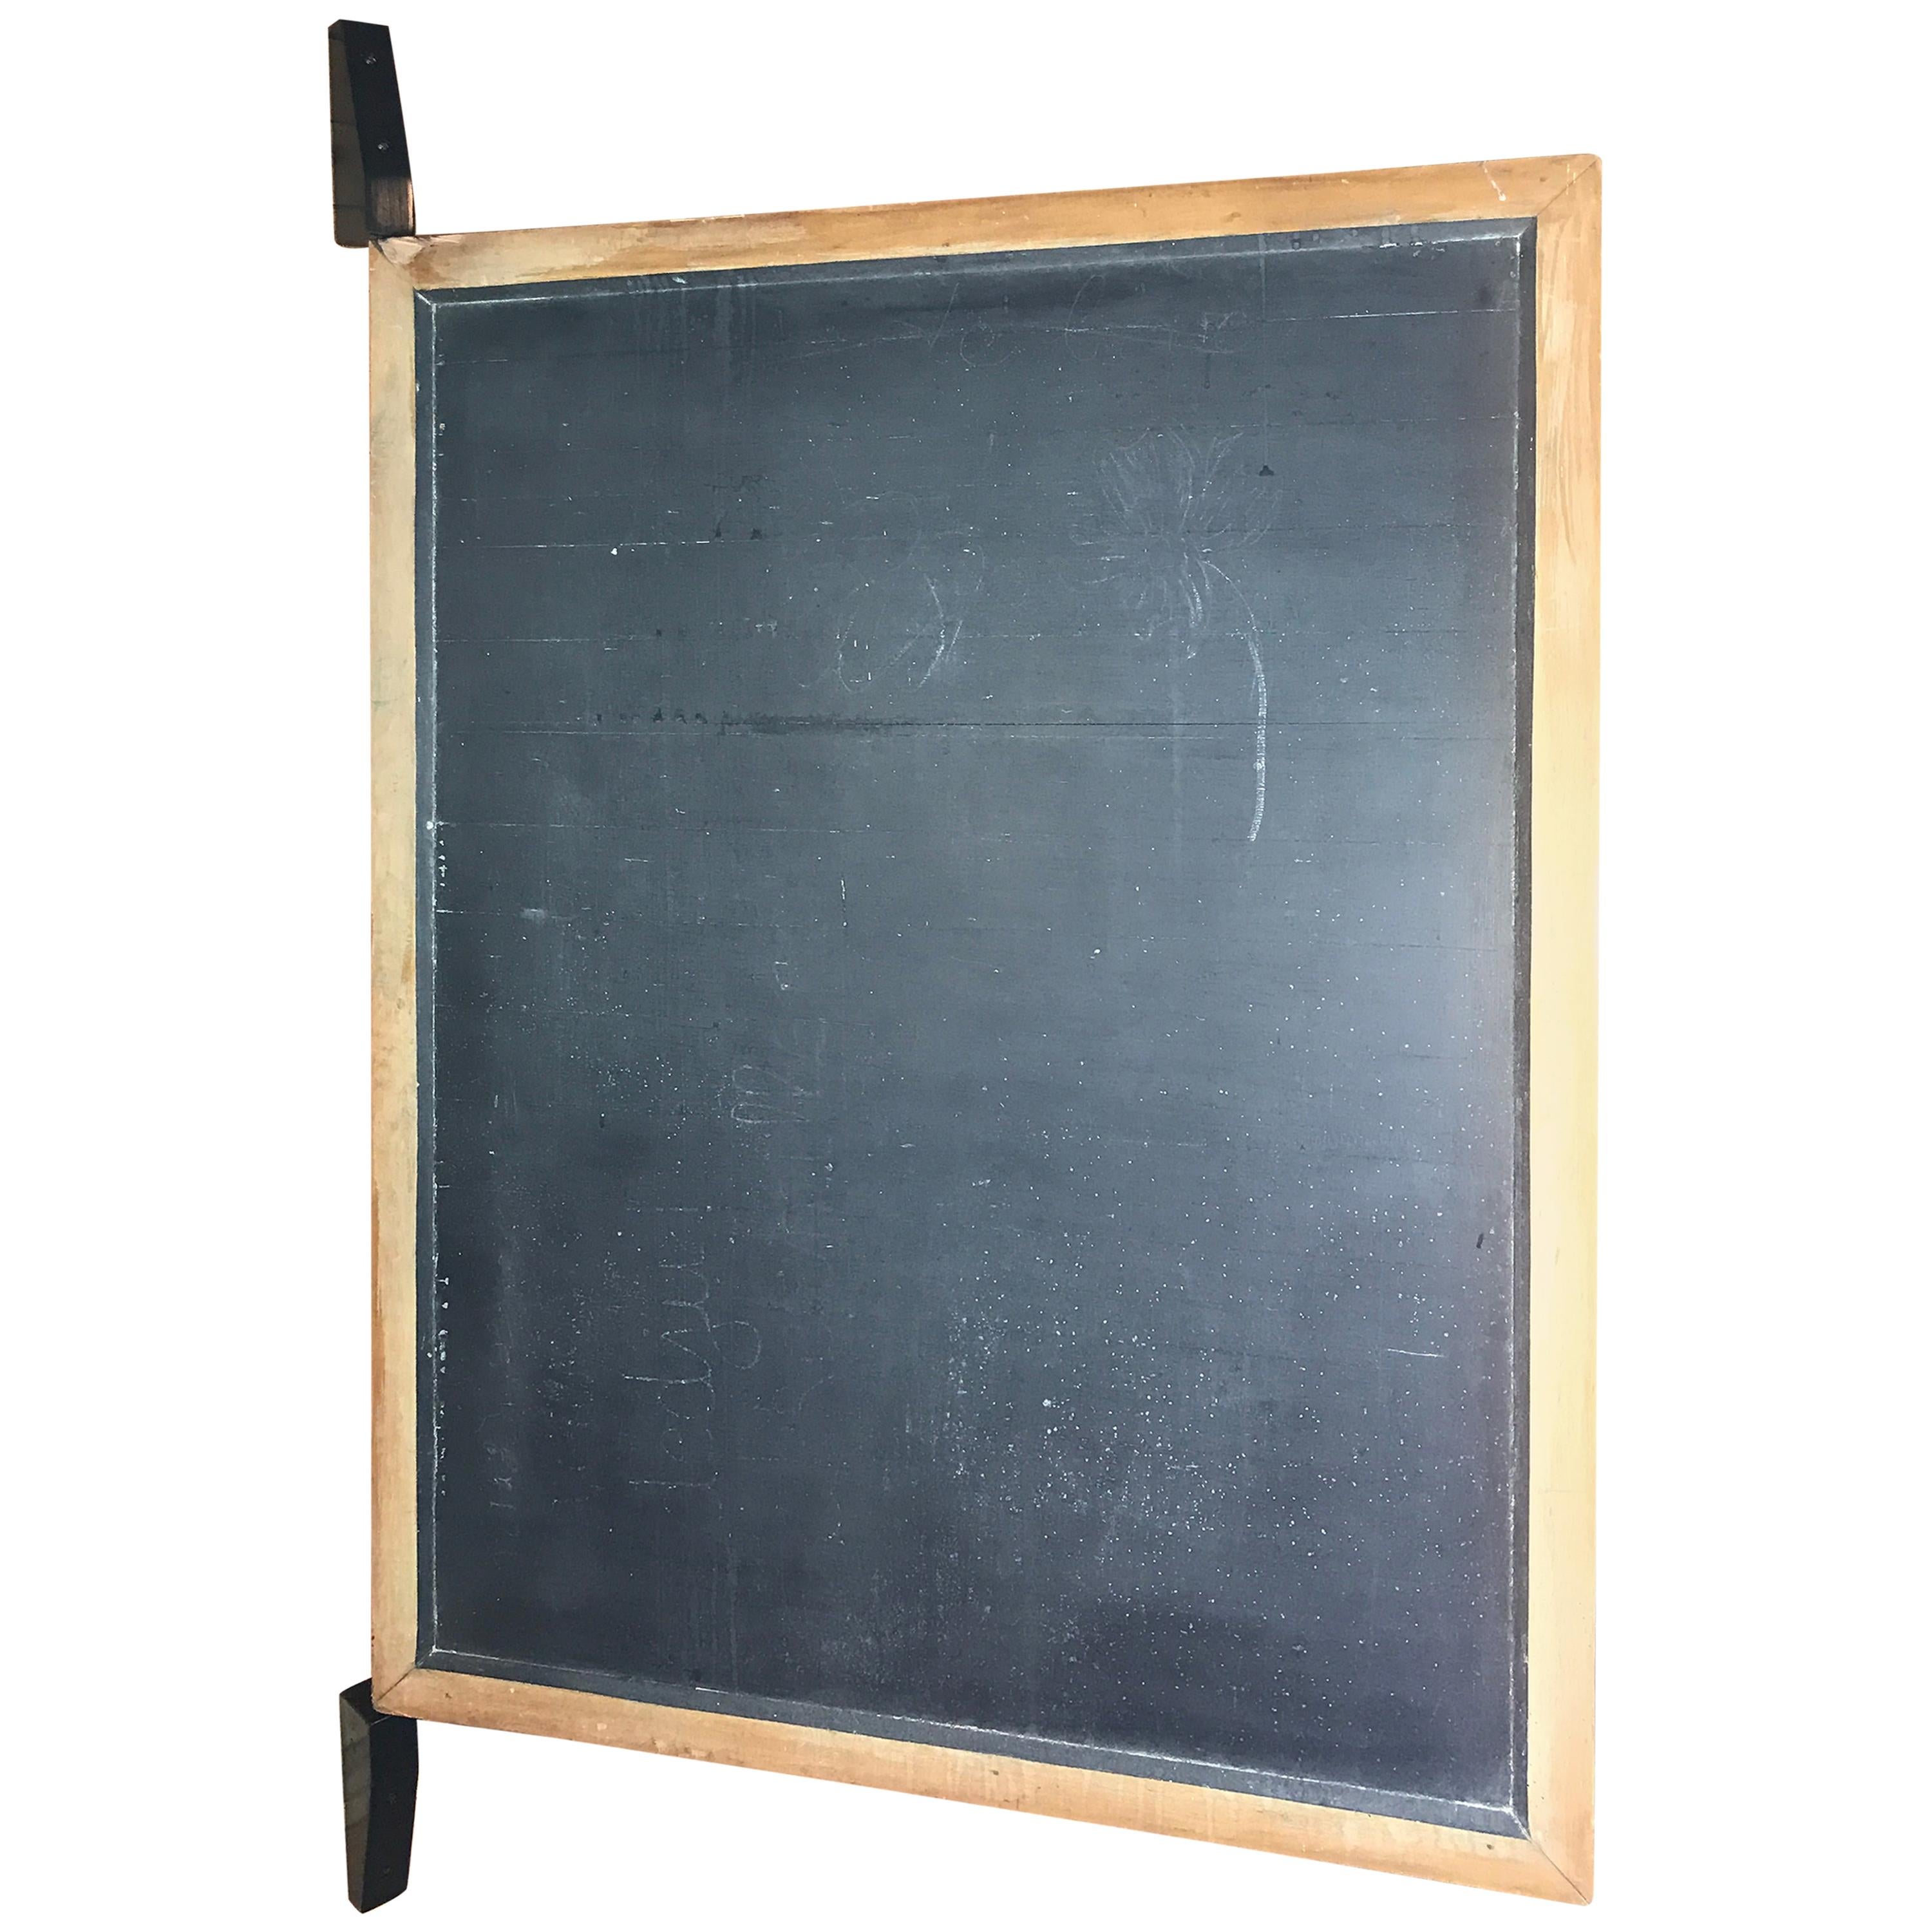 Large Original Industrial Antique Blackboard with Black Wooden Wall Attachment